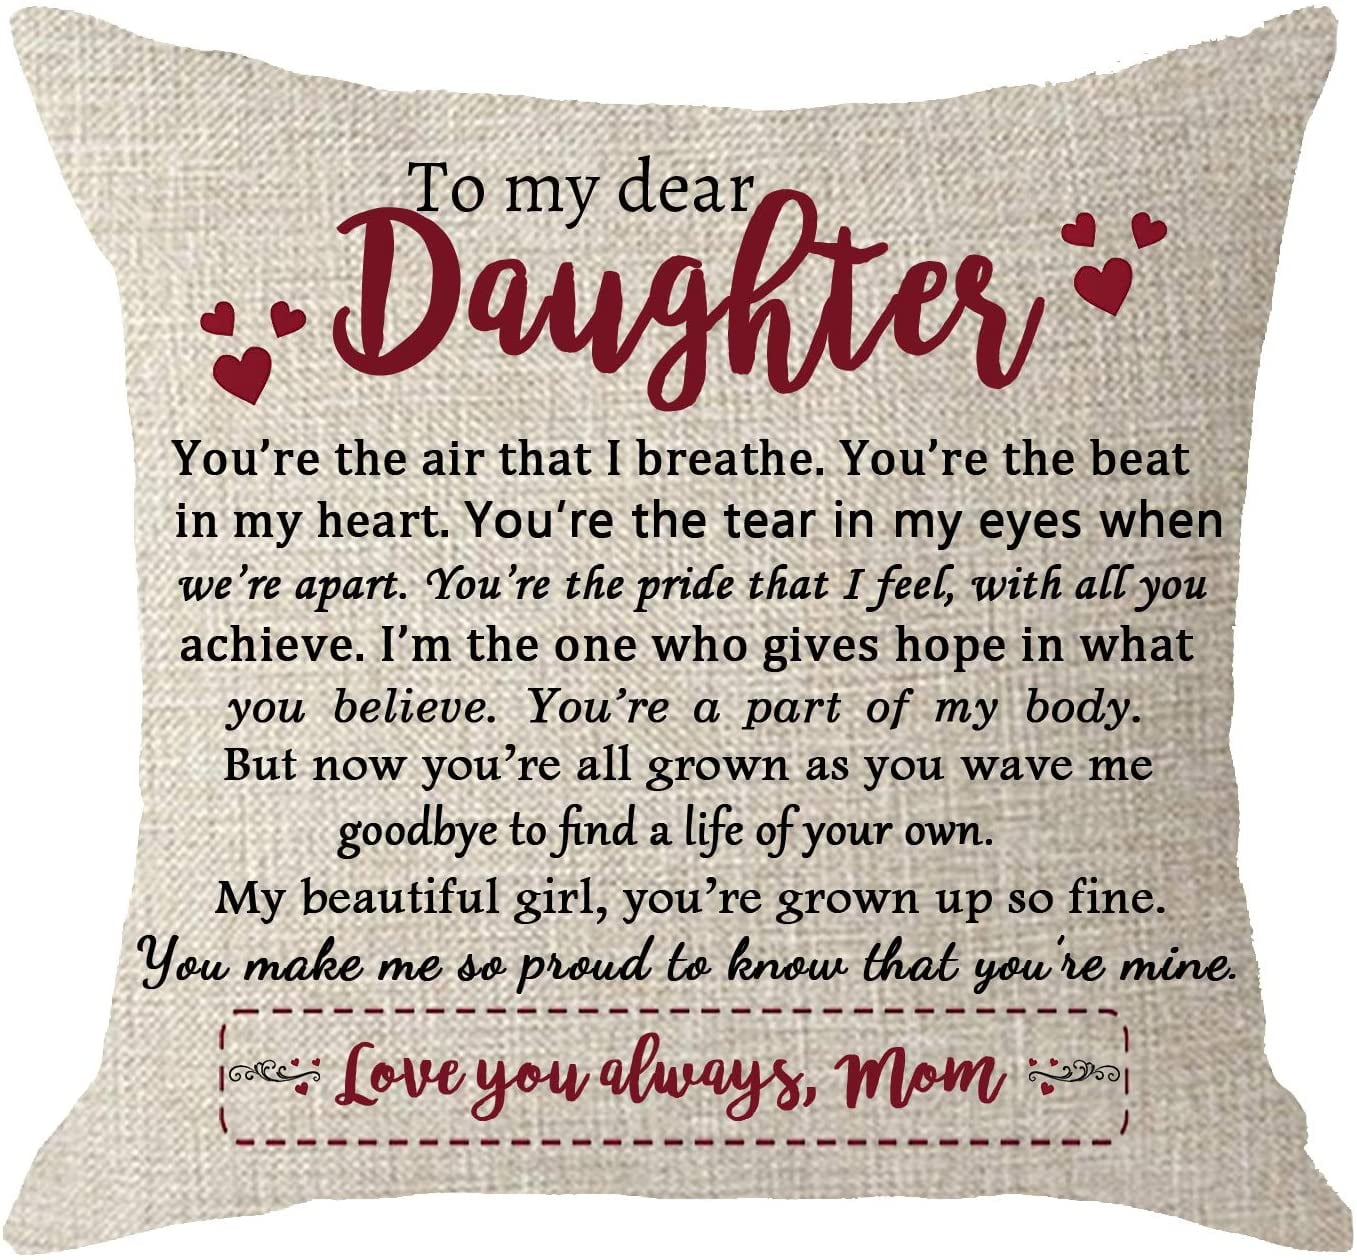 When You were Younger onederful Daughter Gift Throw Pillow Cover with The Saying for Daughter from Mom,Birthday Graduation Gifts Ideas for Daughter Sofa Living Room